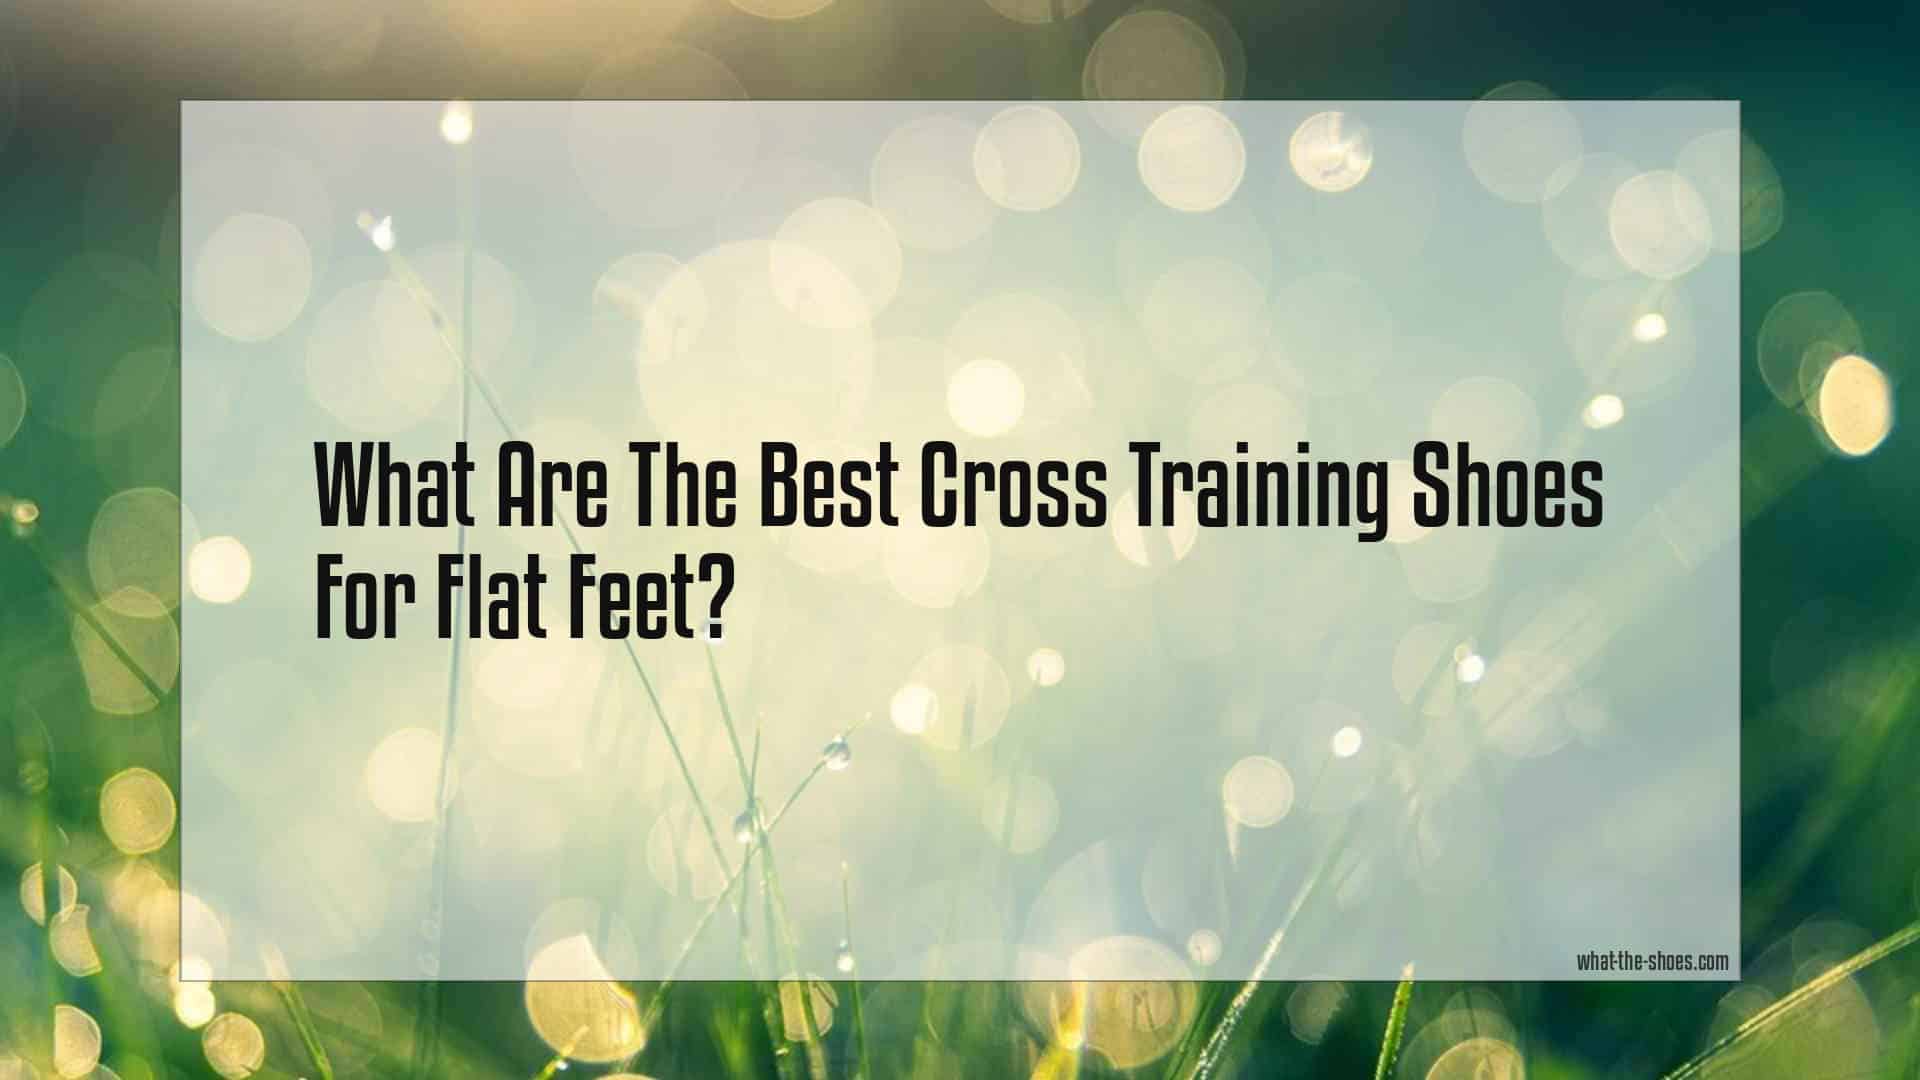 What Are The Best Cross Training Shoes For Flat Feet